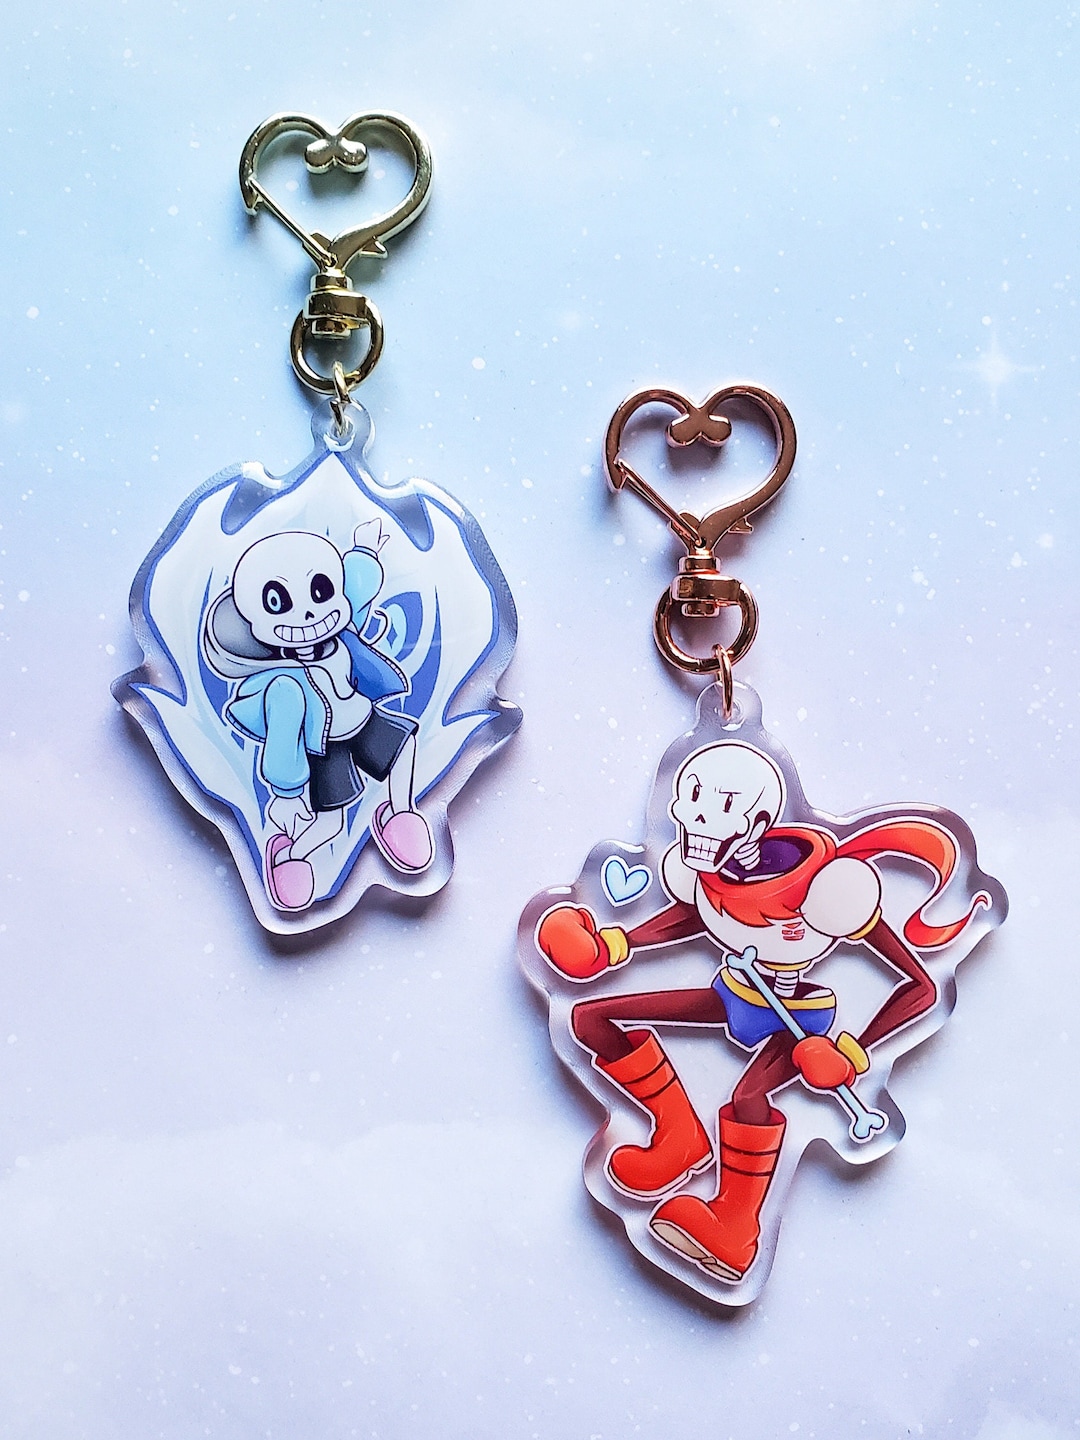 ✦ SANDRAGH ✦ — Undertale keychains! ♥ I will sell them online